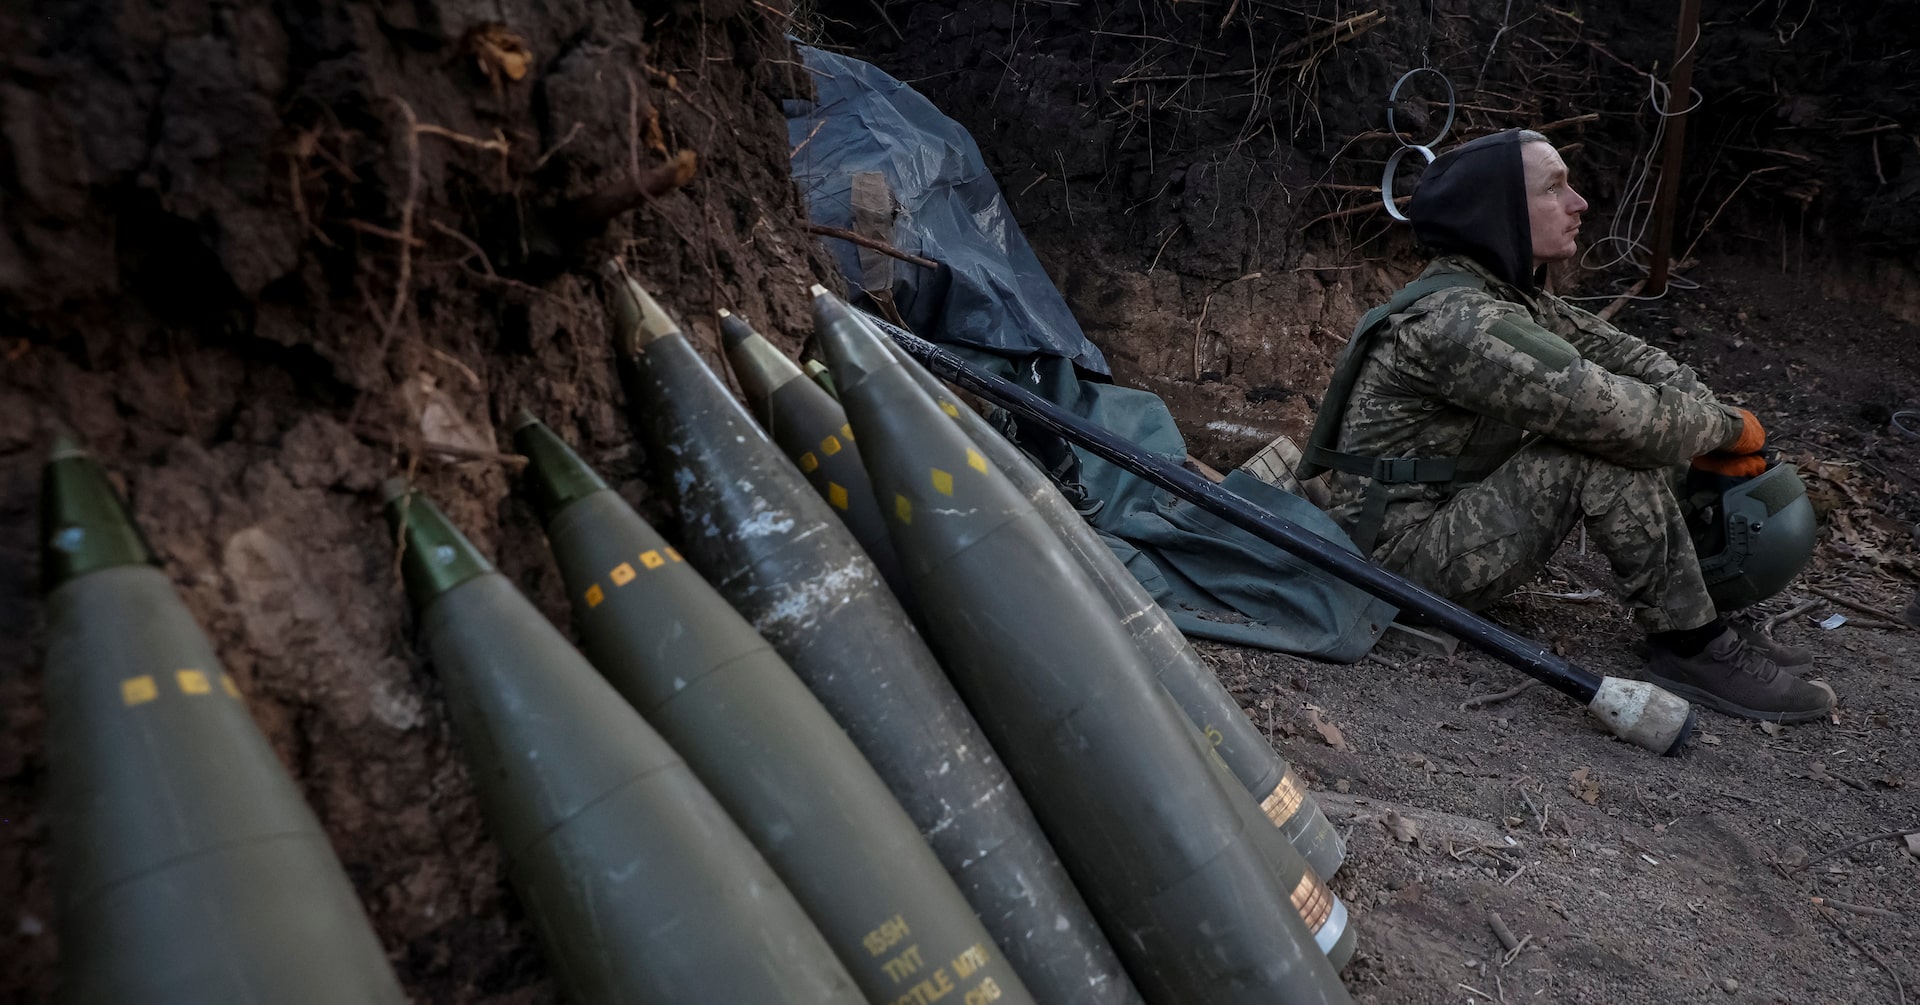 US preparing $1 billion weapons package for Ukraine, officials say - Disclose.tv